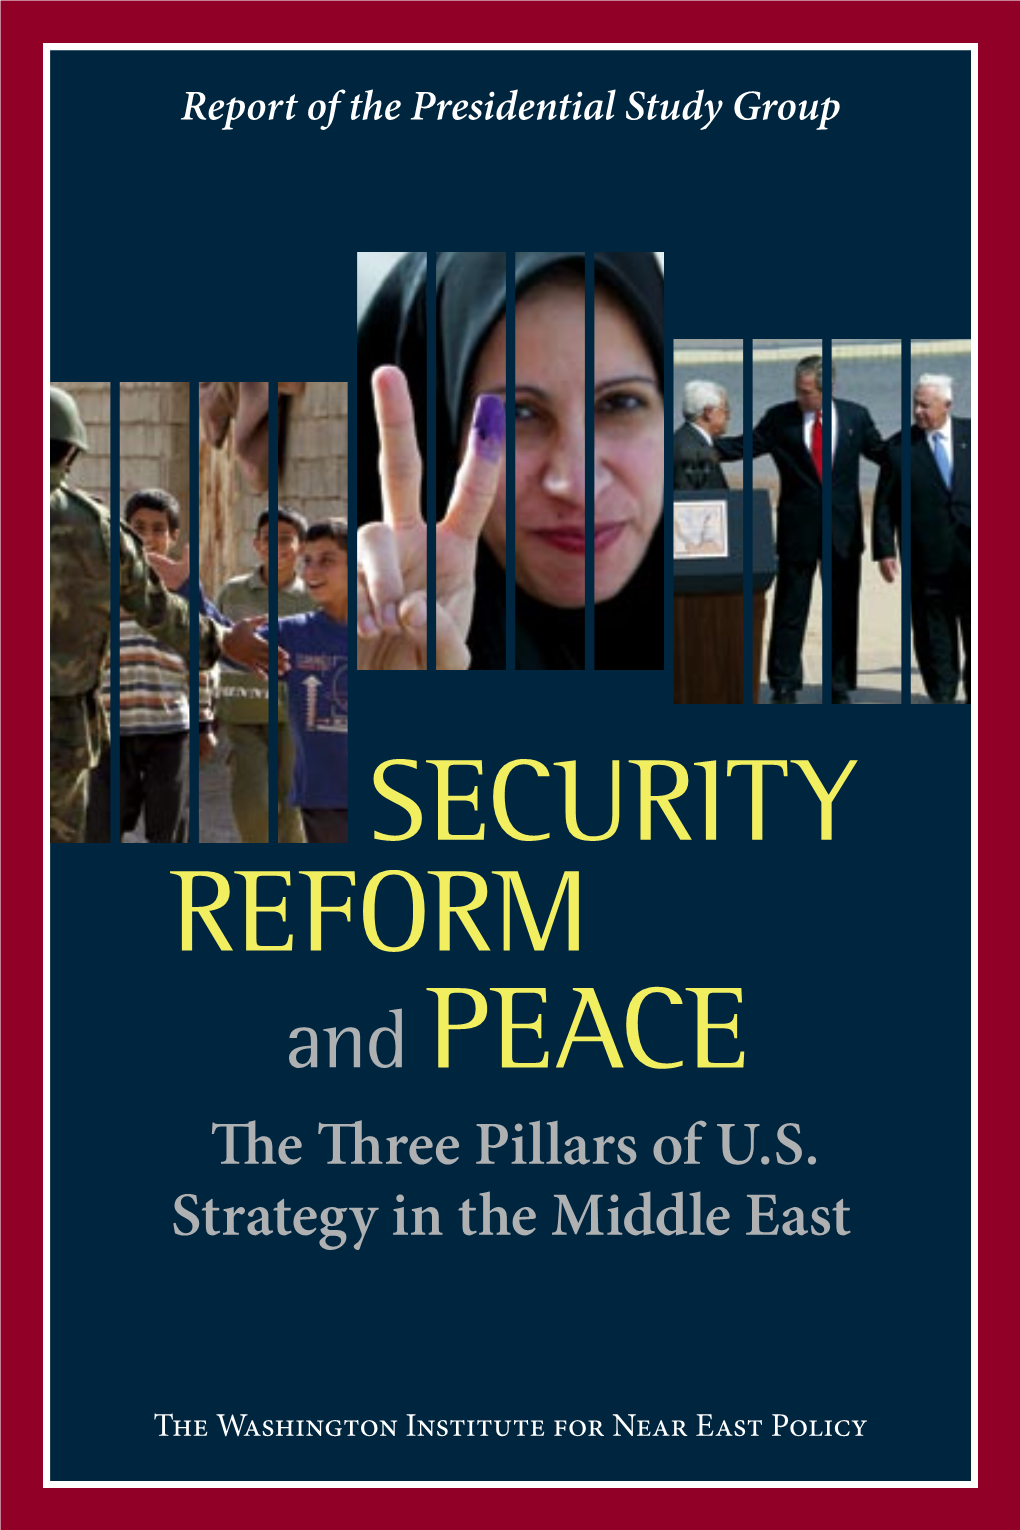 WINEP: Report of the Presidential Study Group: Security, Reform And